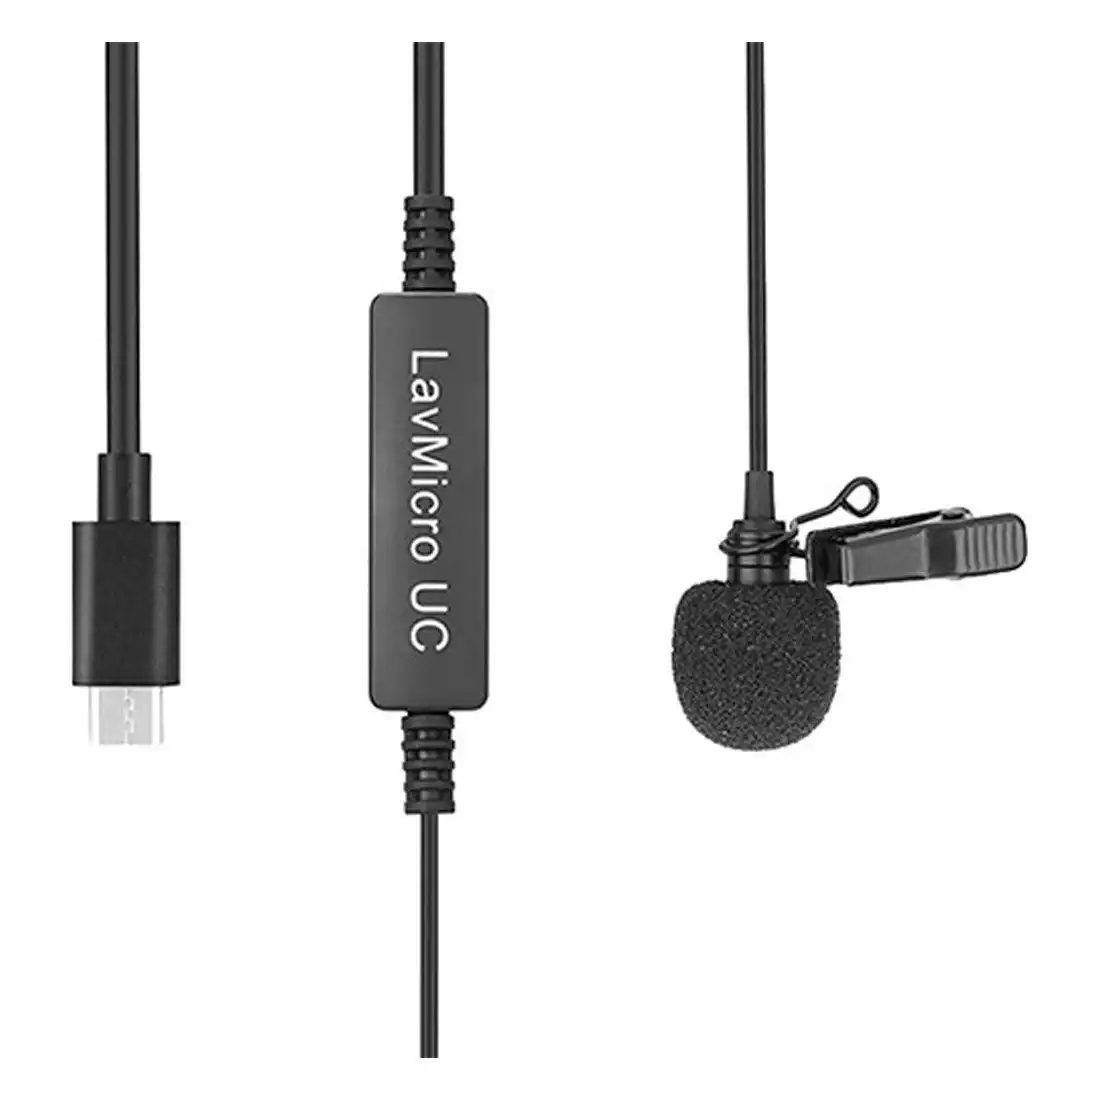 Saramonic Lavmicro UC lavalier microphone For USB Type-C Devices